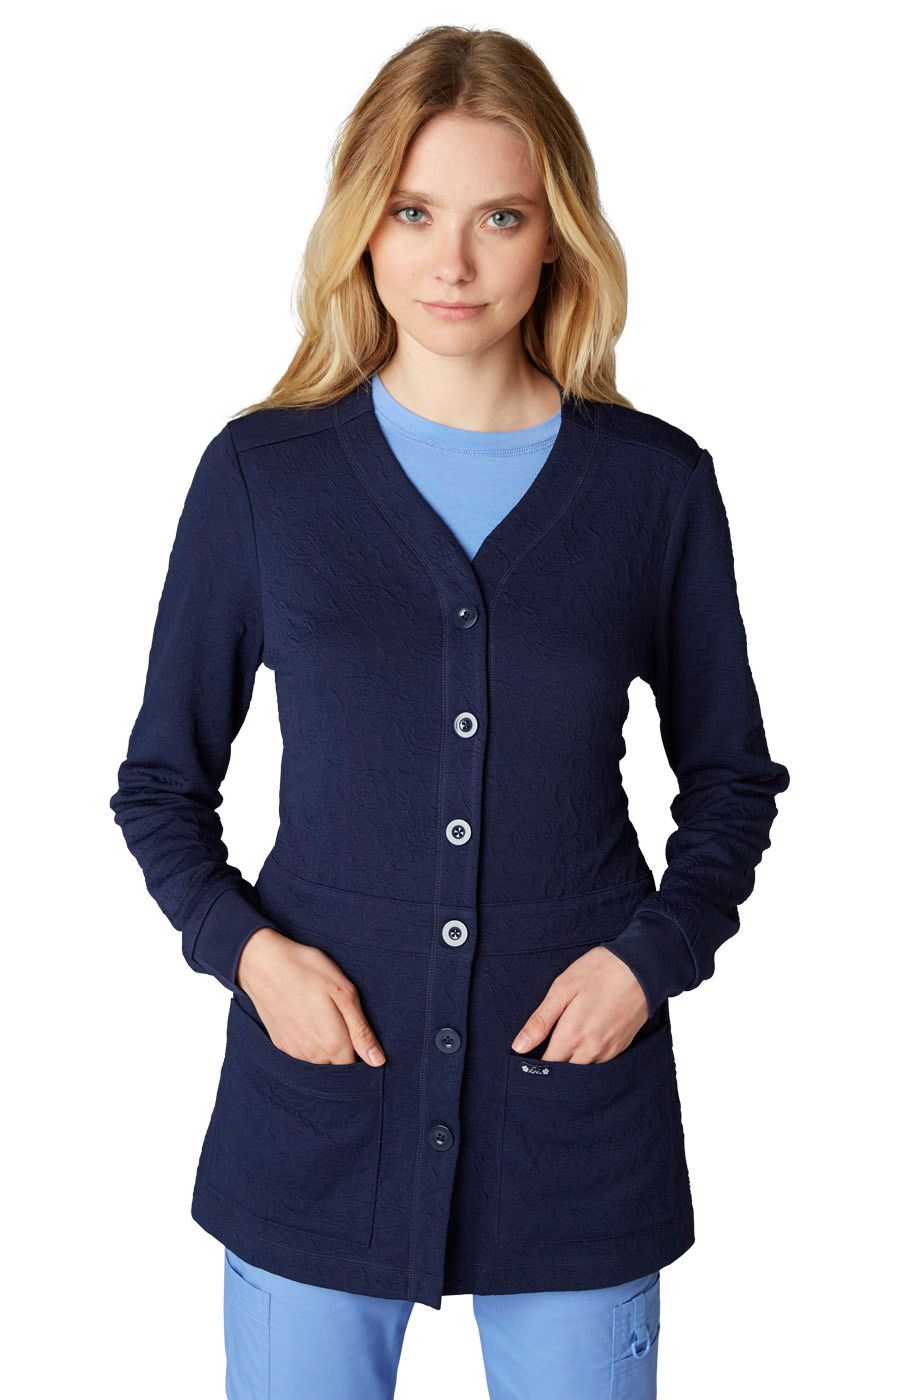 claire-sweater-navy